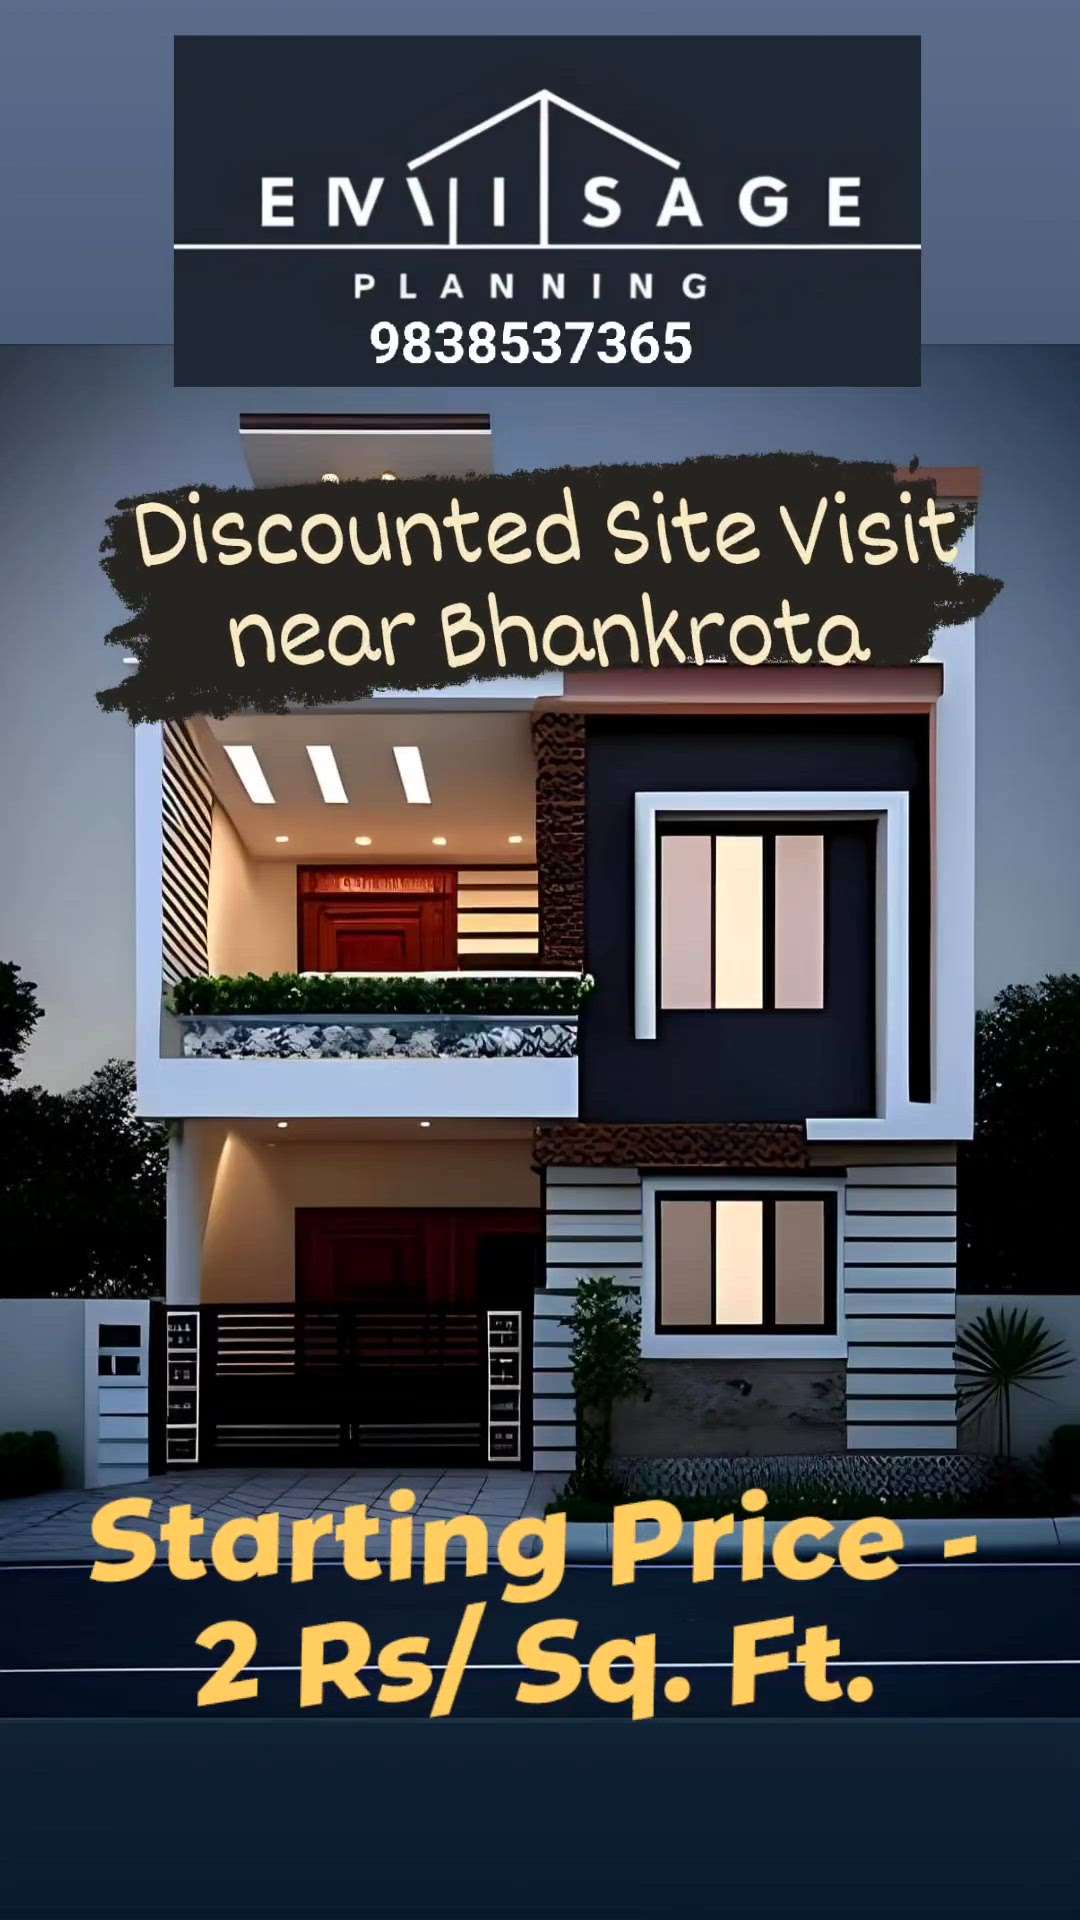 We provide
✔️ Floor Planning,
✔️ Construction
✔️ Vastu consultation
✔️ site visit, 
✔️ Structural Designs
✔️ Steel Details,
✔️ 3D Elevation
✔️ Construction Agreement
and further more!

Content belongs to the Respective owner, DM for the Credit or Removal !

#civil #civilengineering #engineering #plan #planning #houseplans #house #elevation #blueprint #design